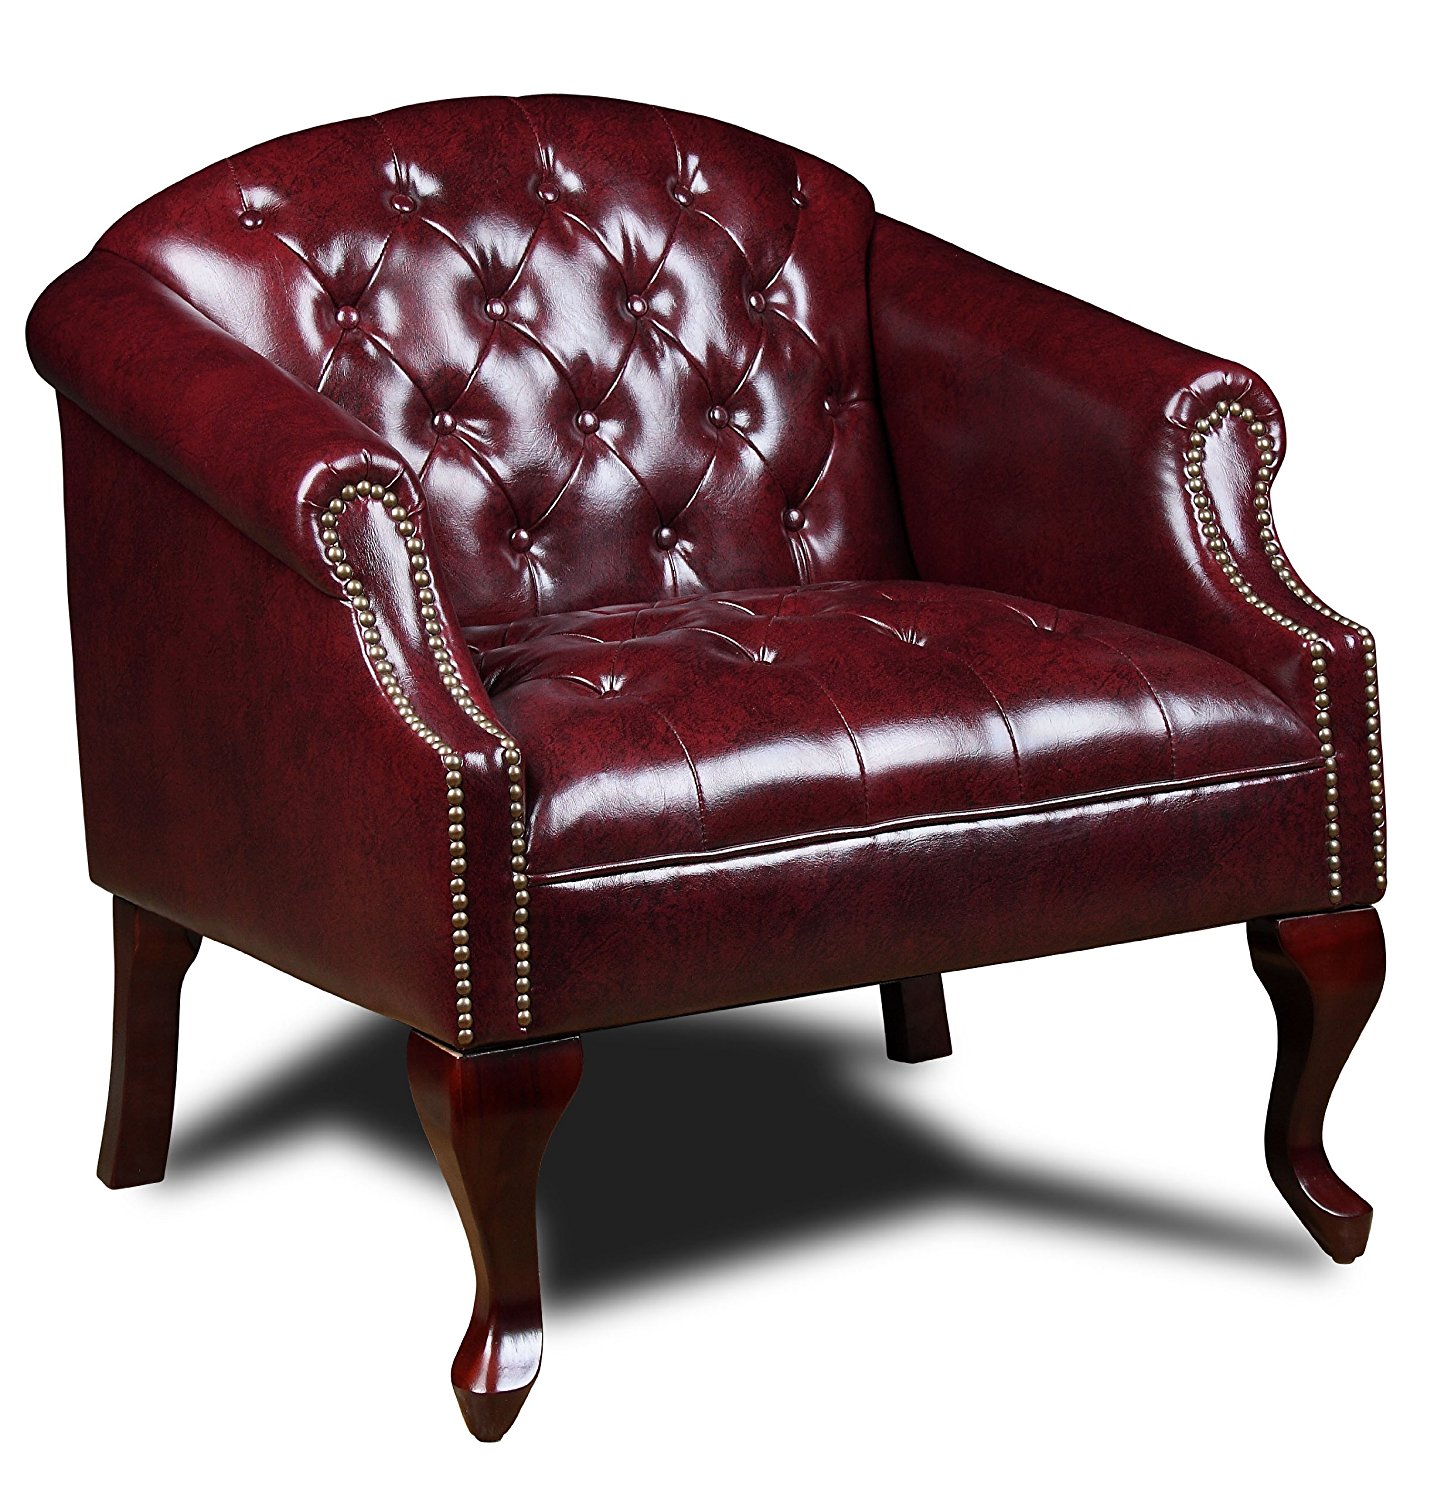 Boss Office Products BR99801-BY Classic Traditional Button Tufted Club Chair in Oxblood